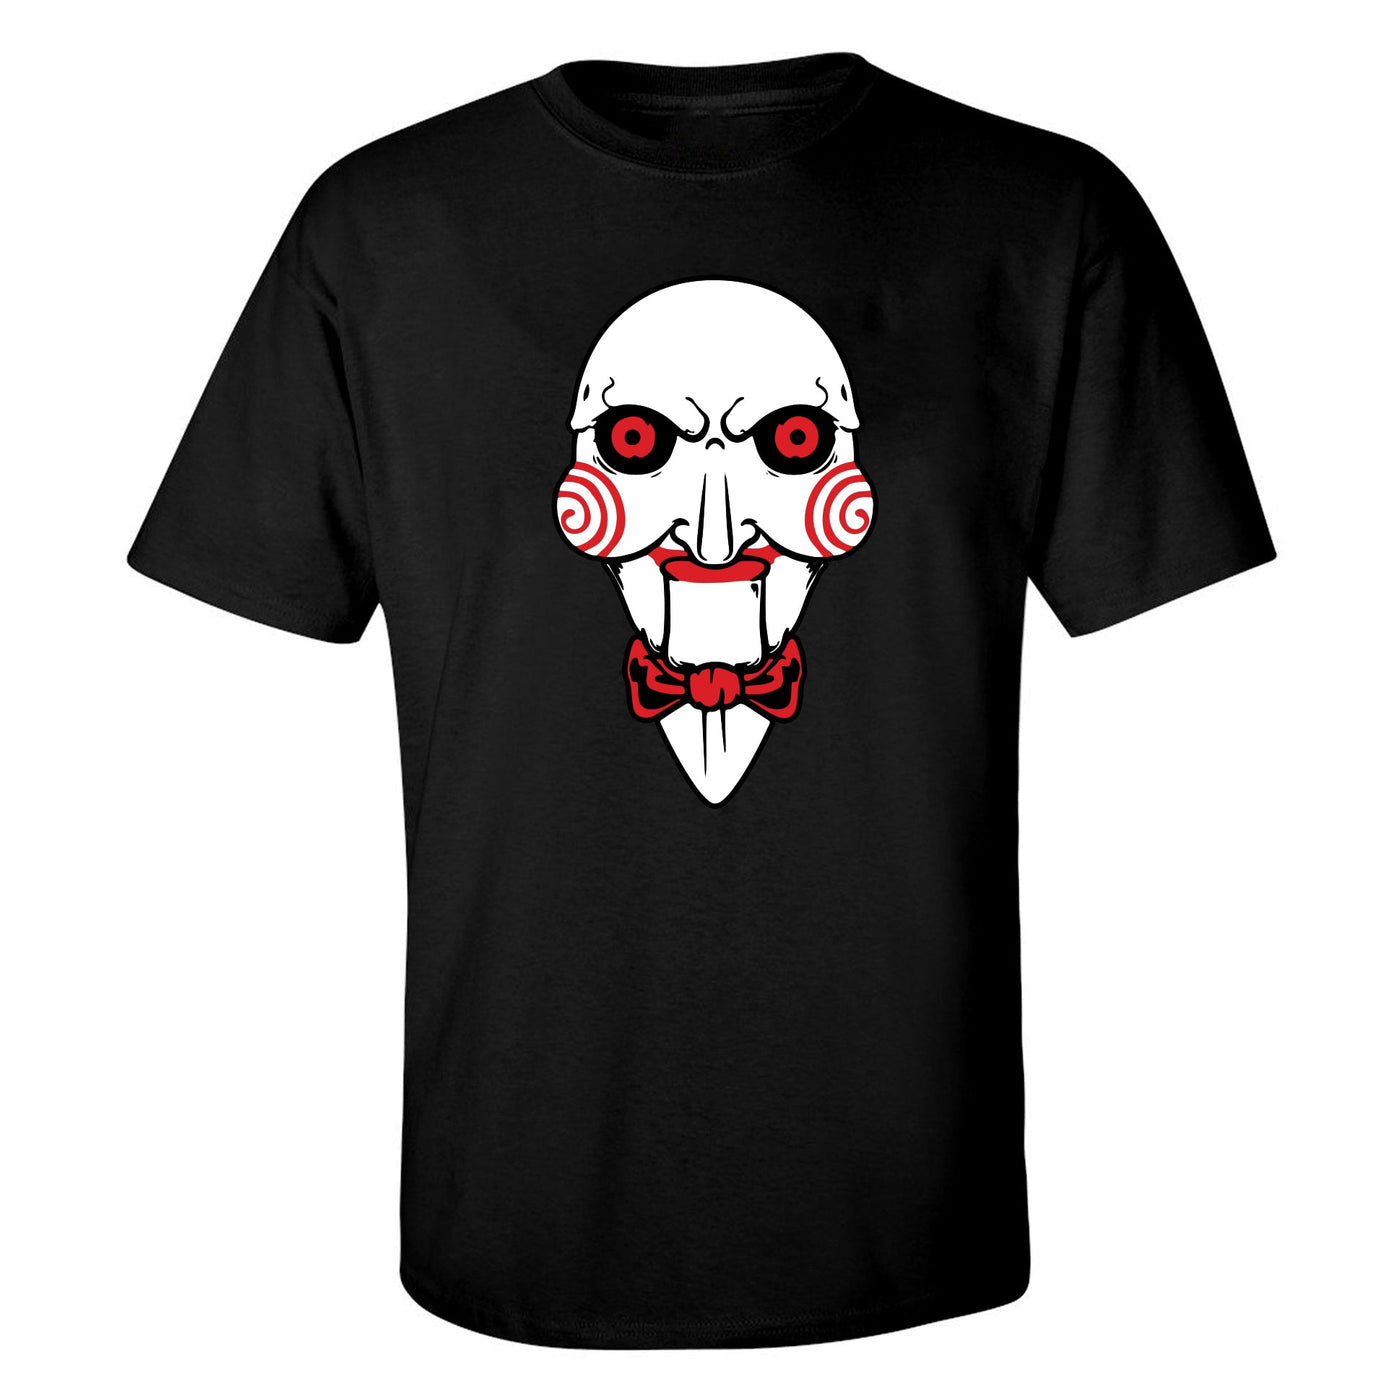 "I Want to Play a Game" Short Sleeve T-Shirt